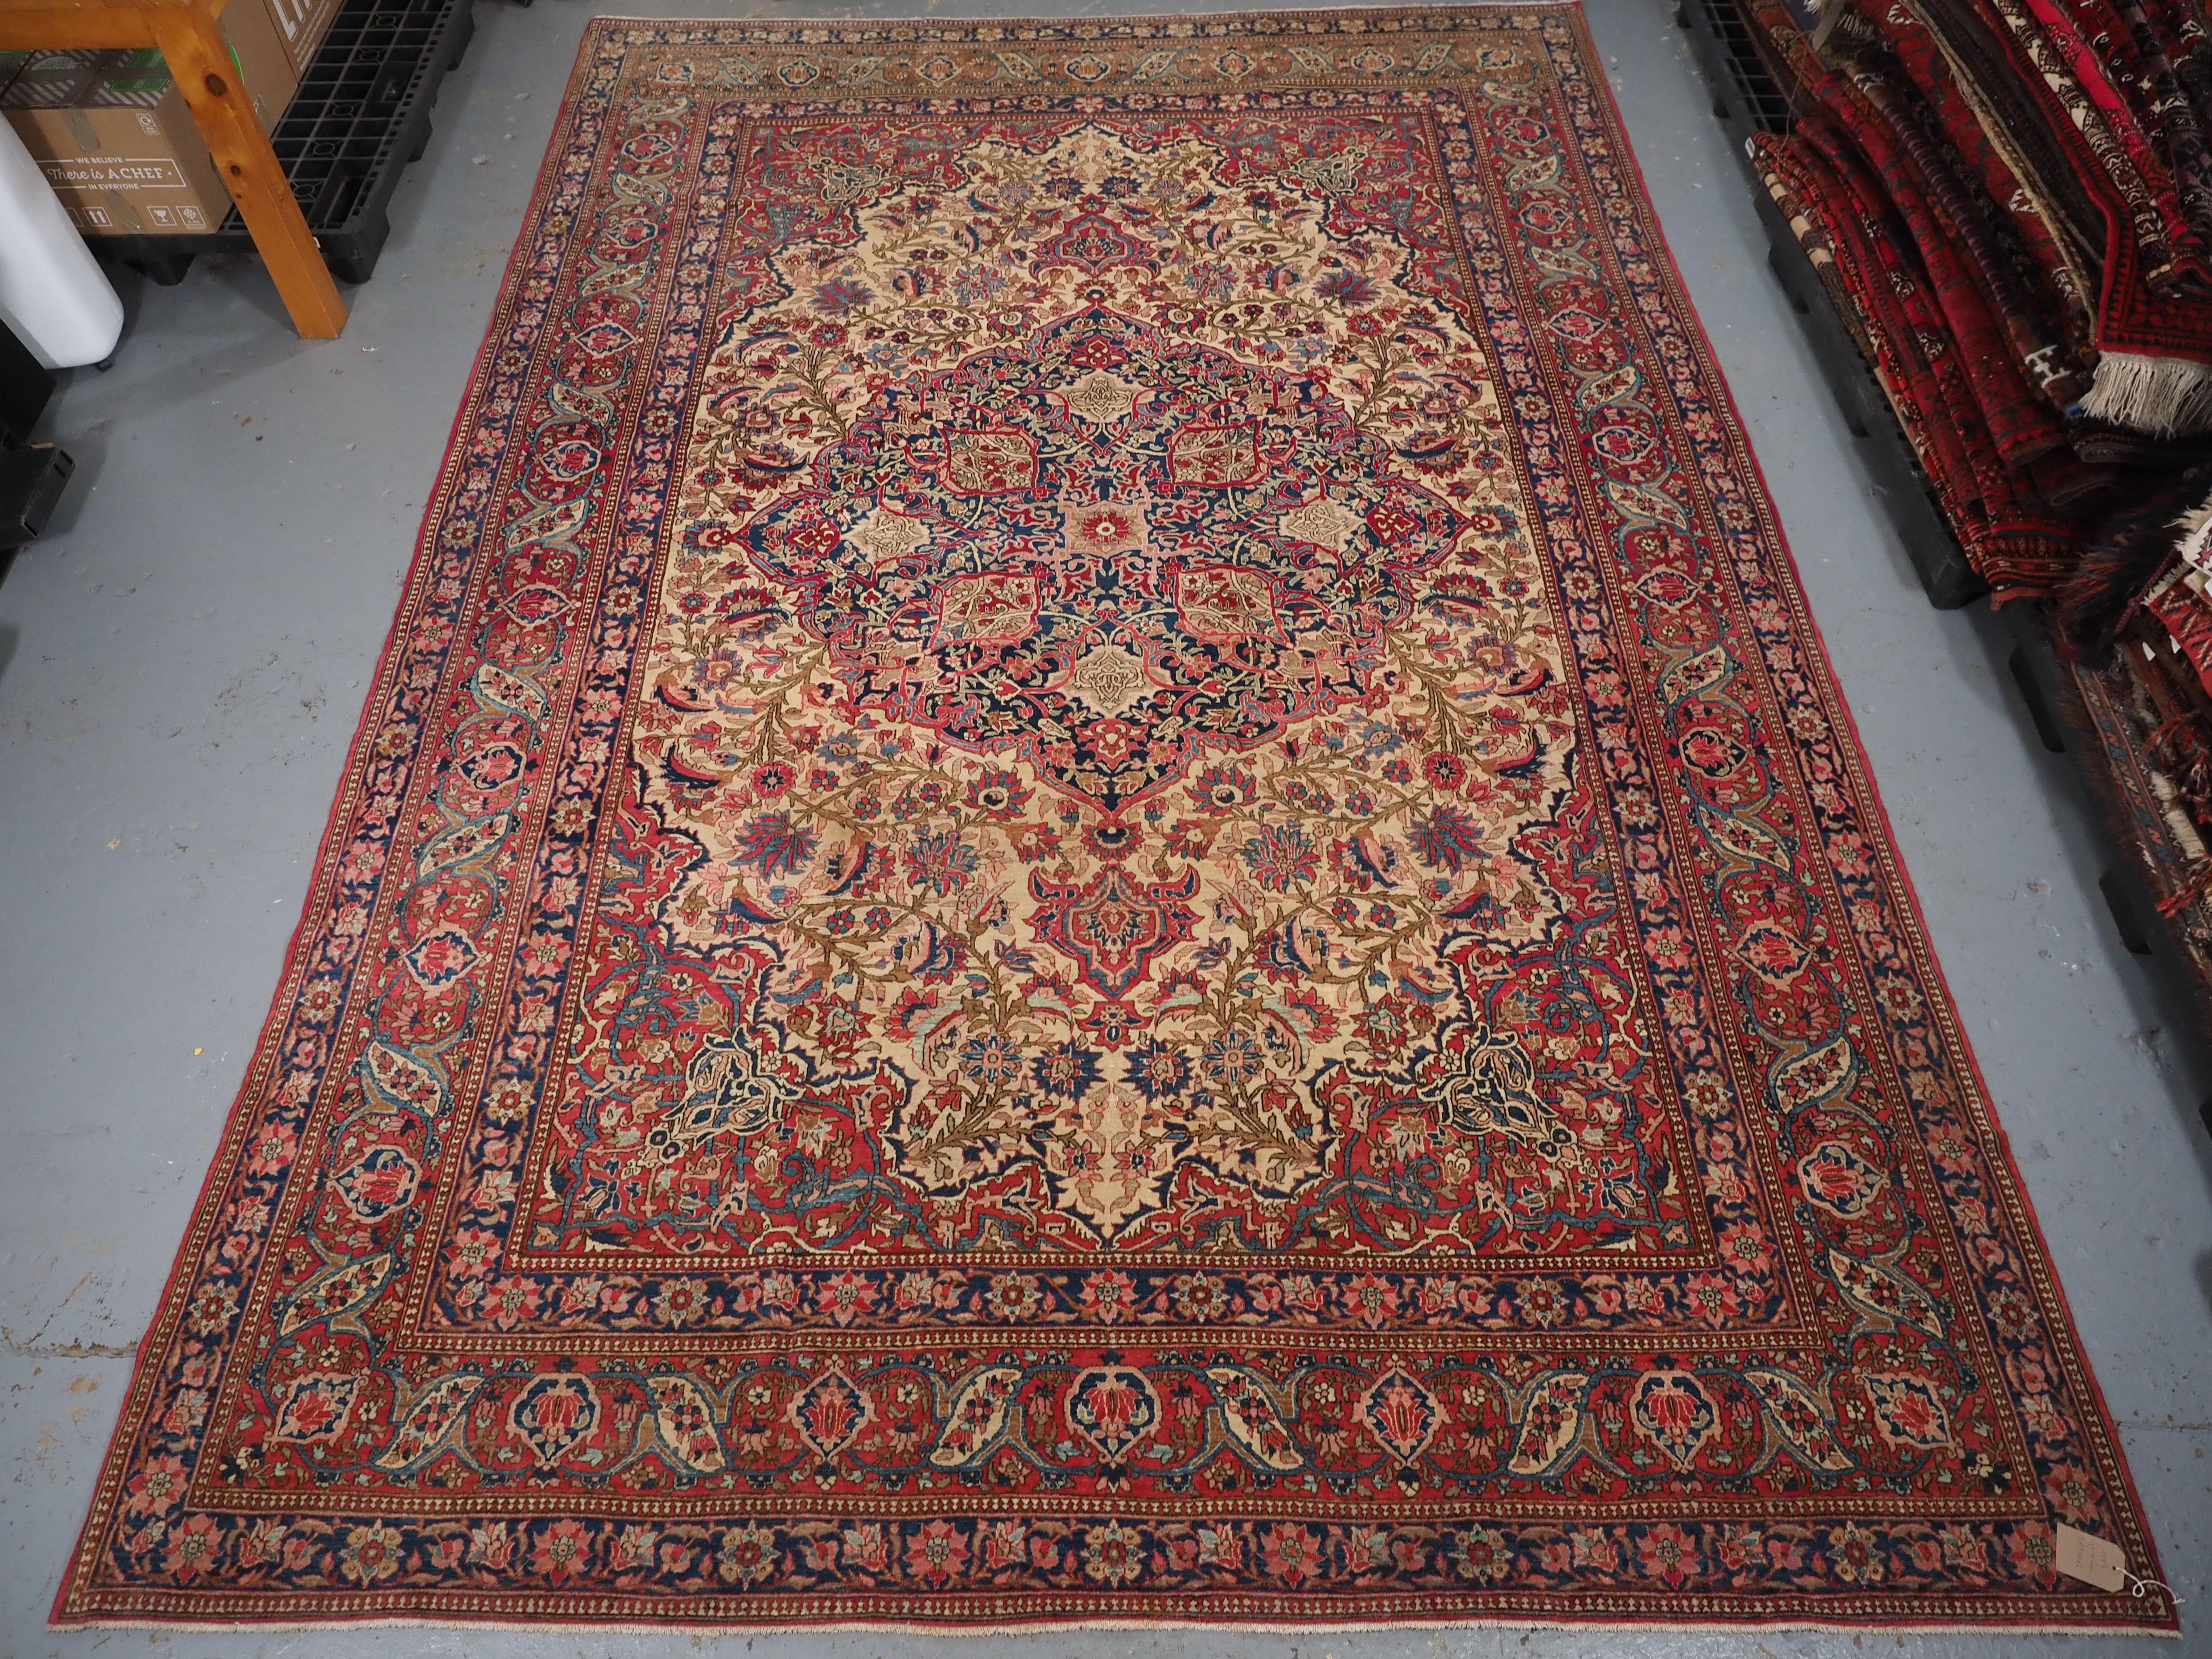 Size: 12ft 7in x 8ft 7in (383 x 262cm).

Antique Isfahan carpet of classic design, the carpet has a light camel ground with a floral design in pastel shades.

Circa 1900.

This is a really outstanding carpet of fine weave with excellent colour, the